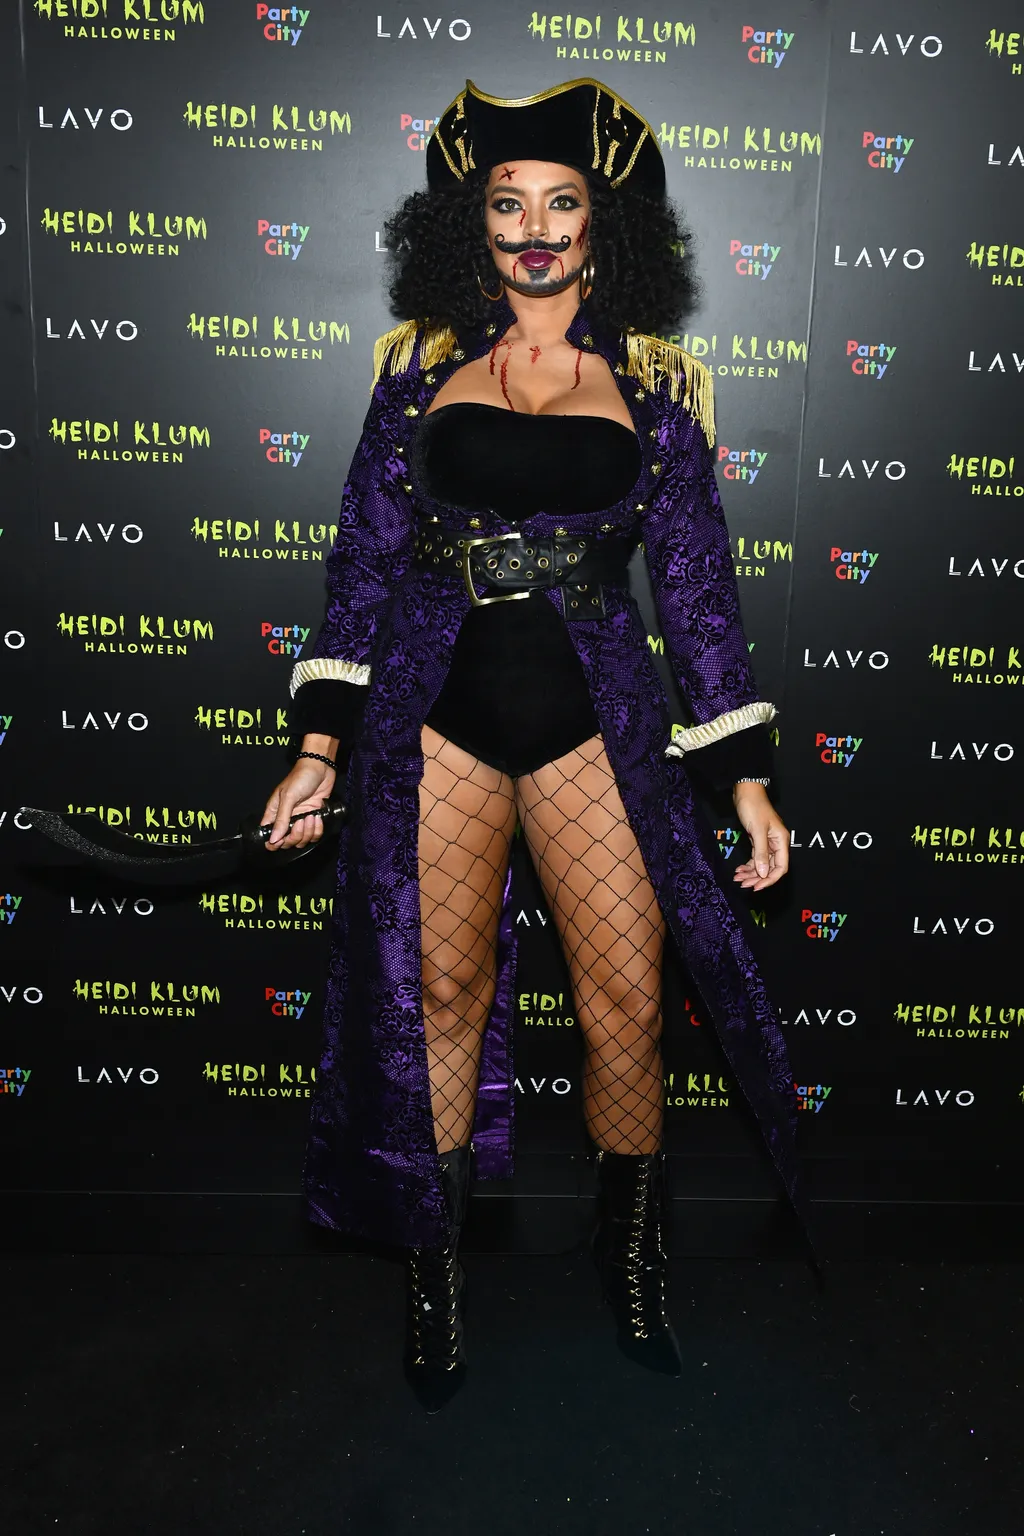 Heidi Klum's 19th Annual Halloween Party Presented By Party City And SVEDKA Vodka At LAVO New York - Arrivals GettyImageRank3 Arts Culture and Entertainment 